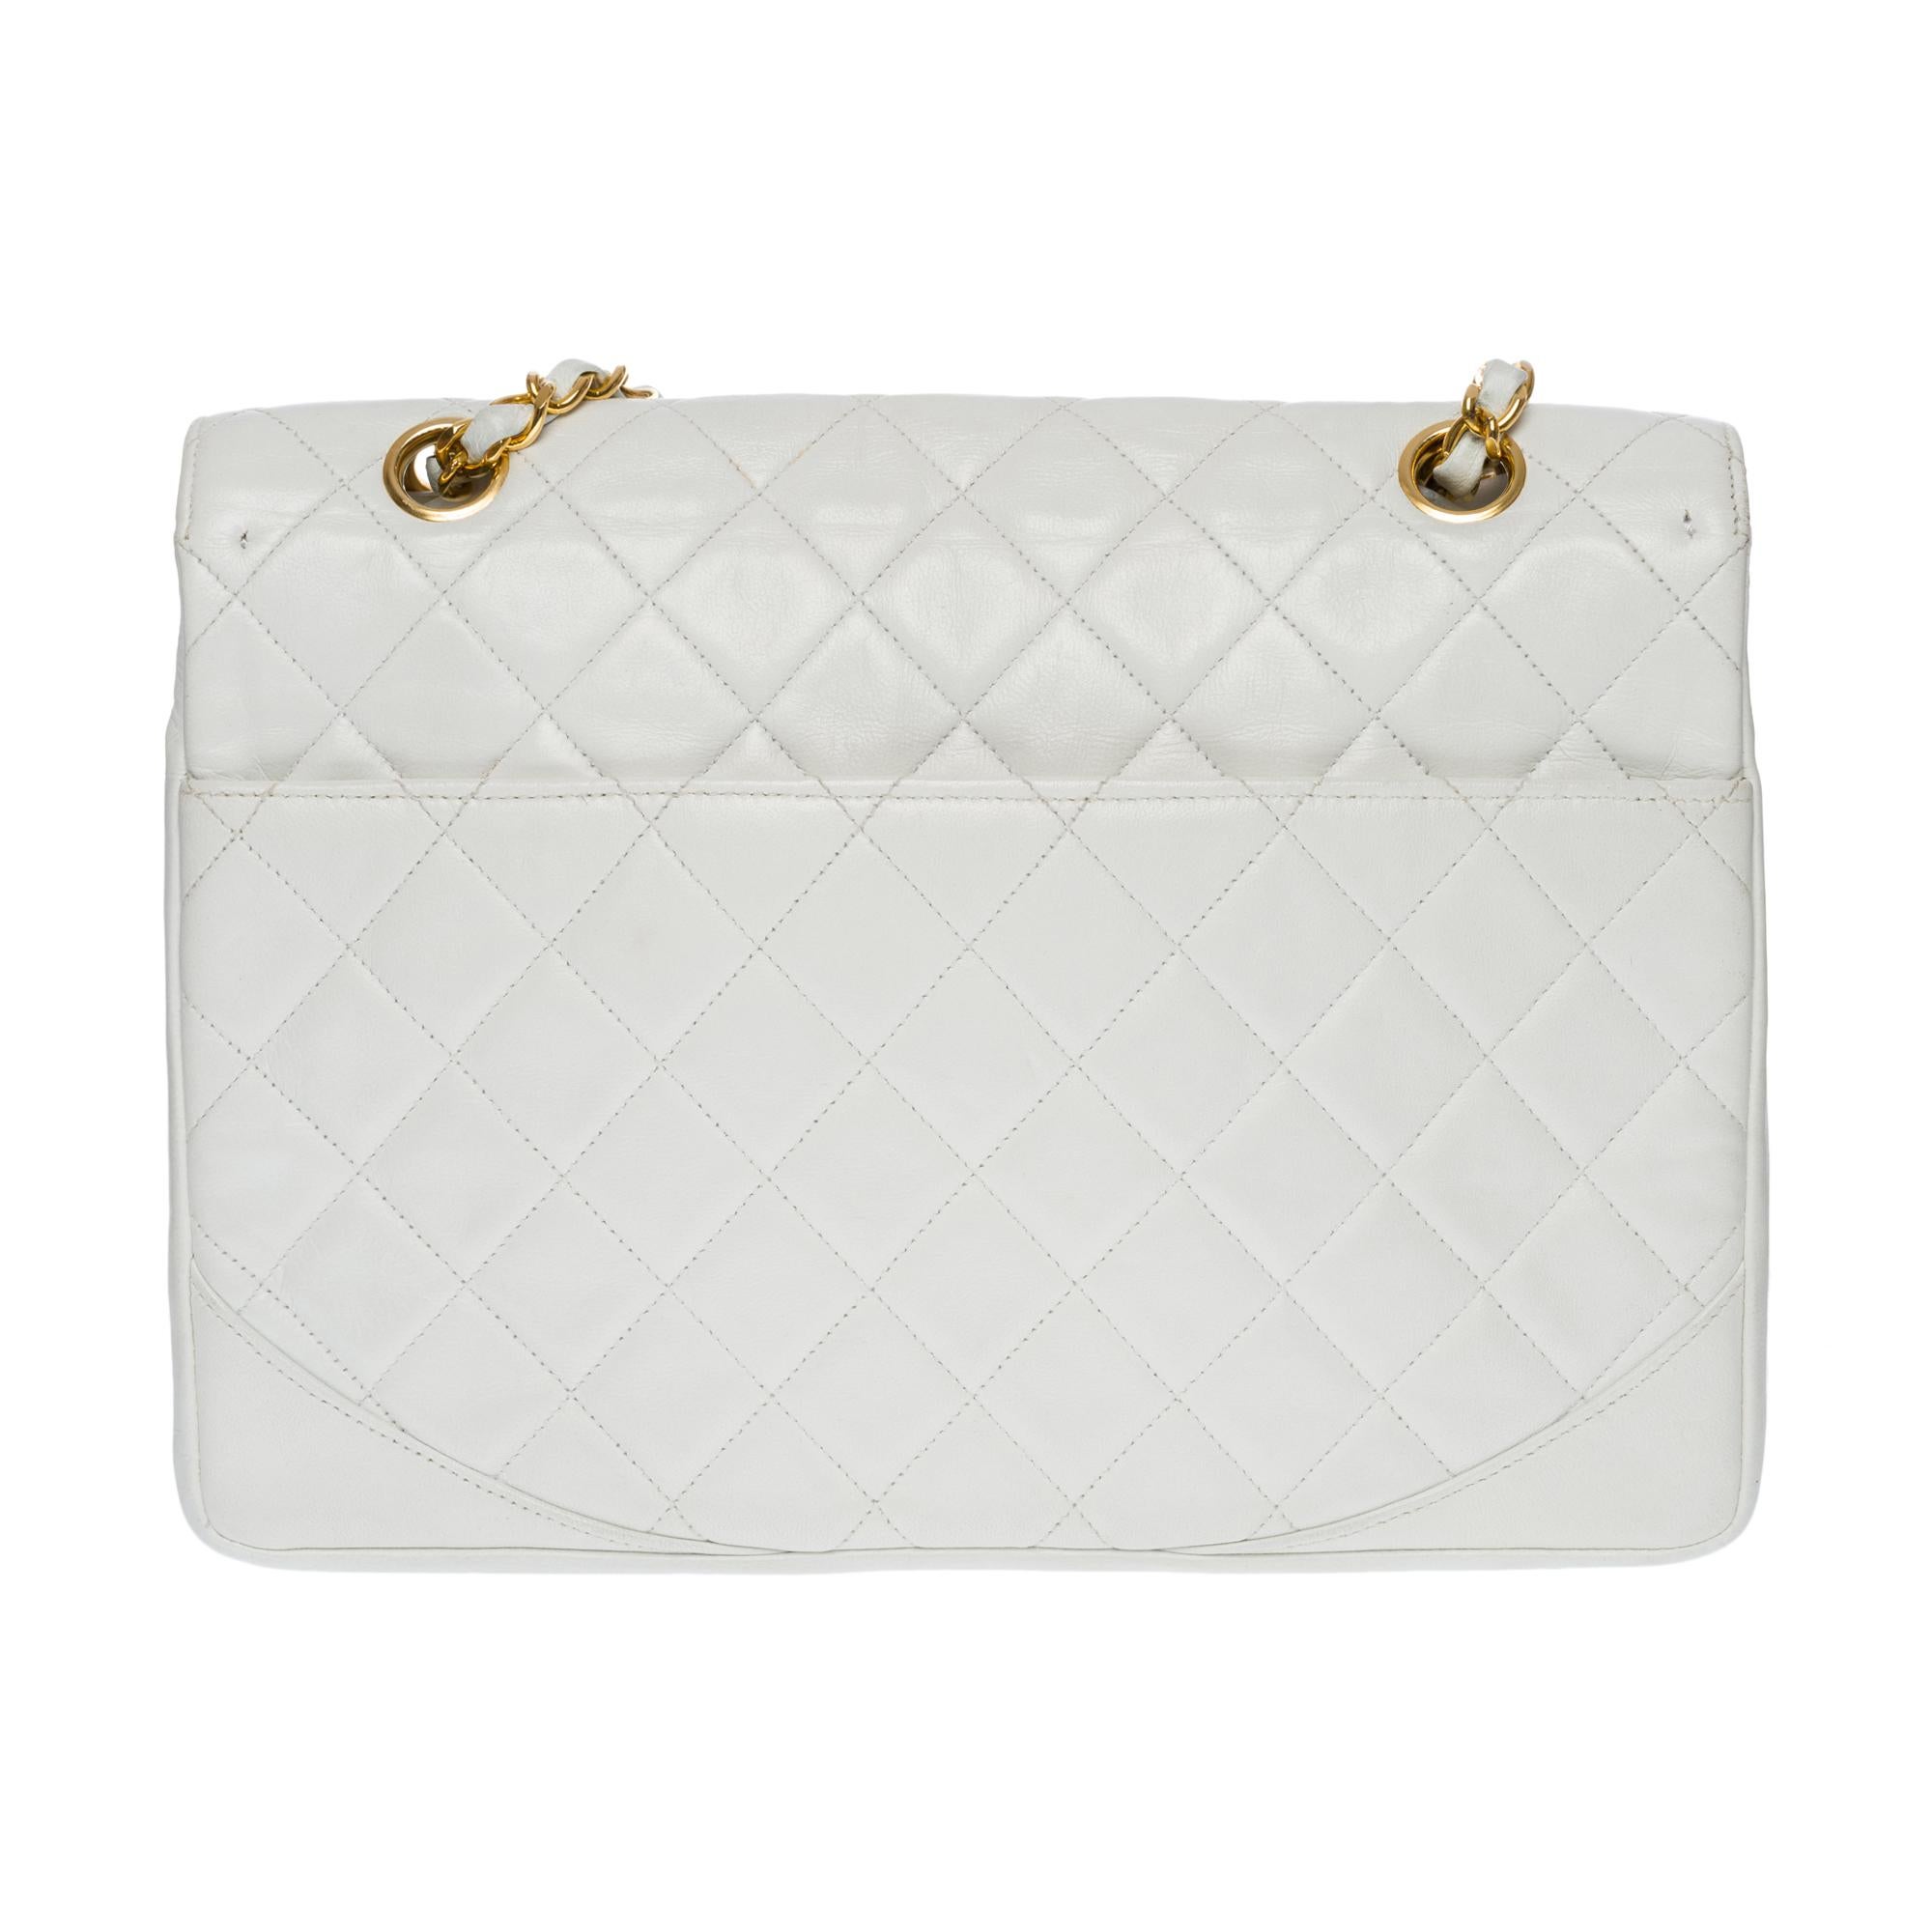 Very chic bag Chanel Classic flap bag in white quilted leather, gold-plated metal hardware, a chain-handle in gold-plated metal interlaced with white leather for a shoulder or shoulder strap

Backpack pocket
Closure in gilded metal on flap
White